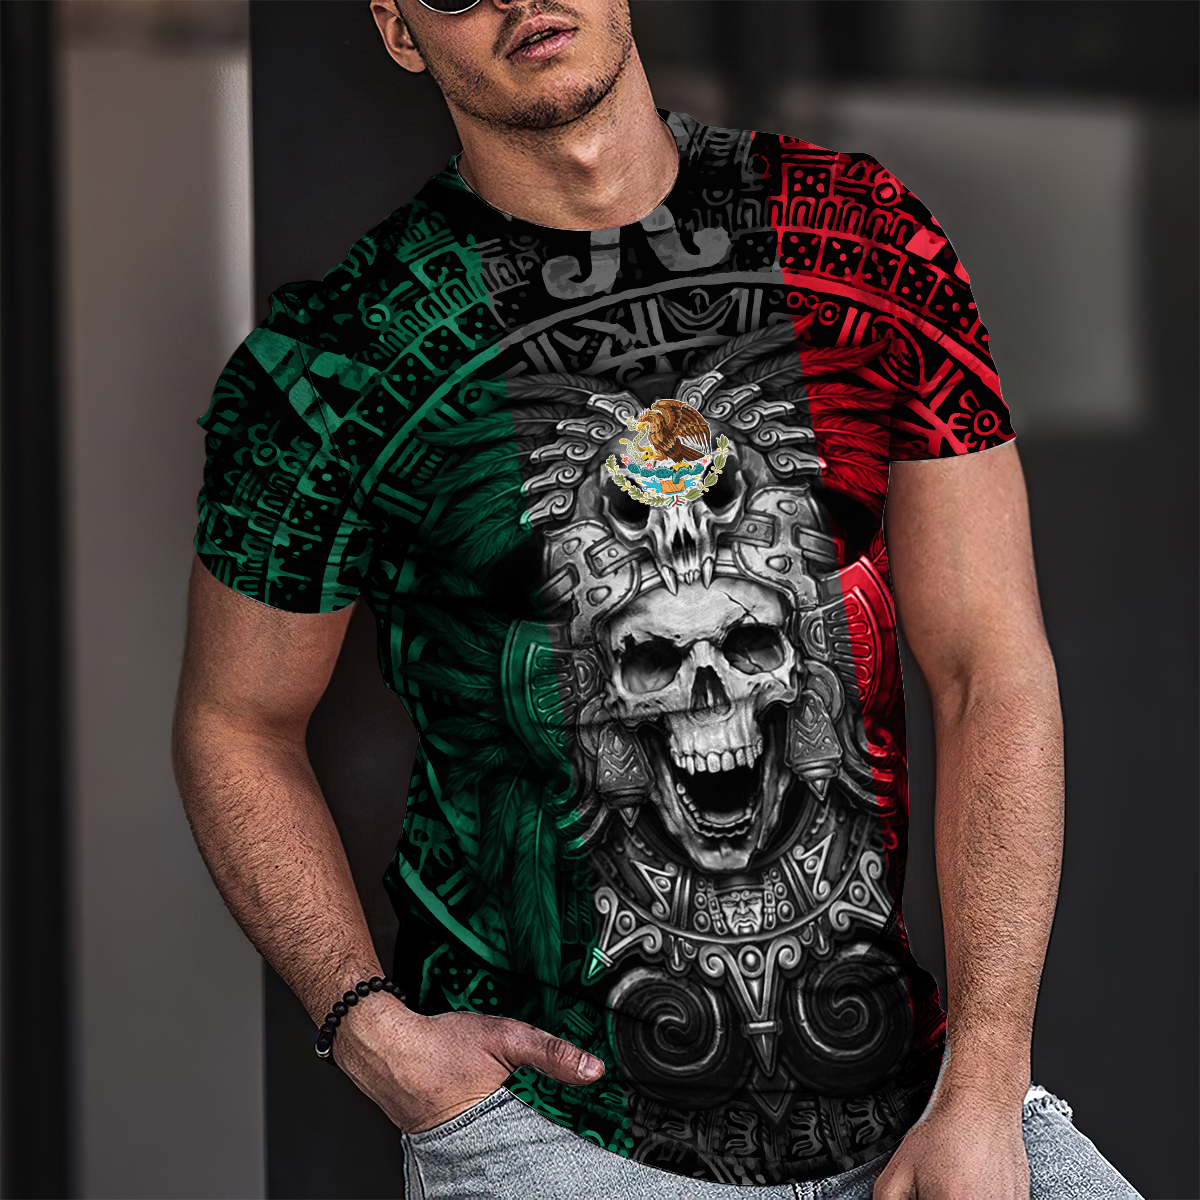 3D All Over Print Maxican Aztec Warrior Shirt/ Gift for Mexico Shirt